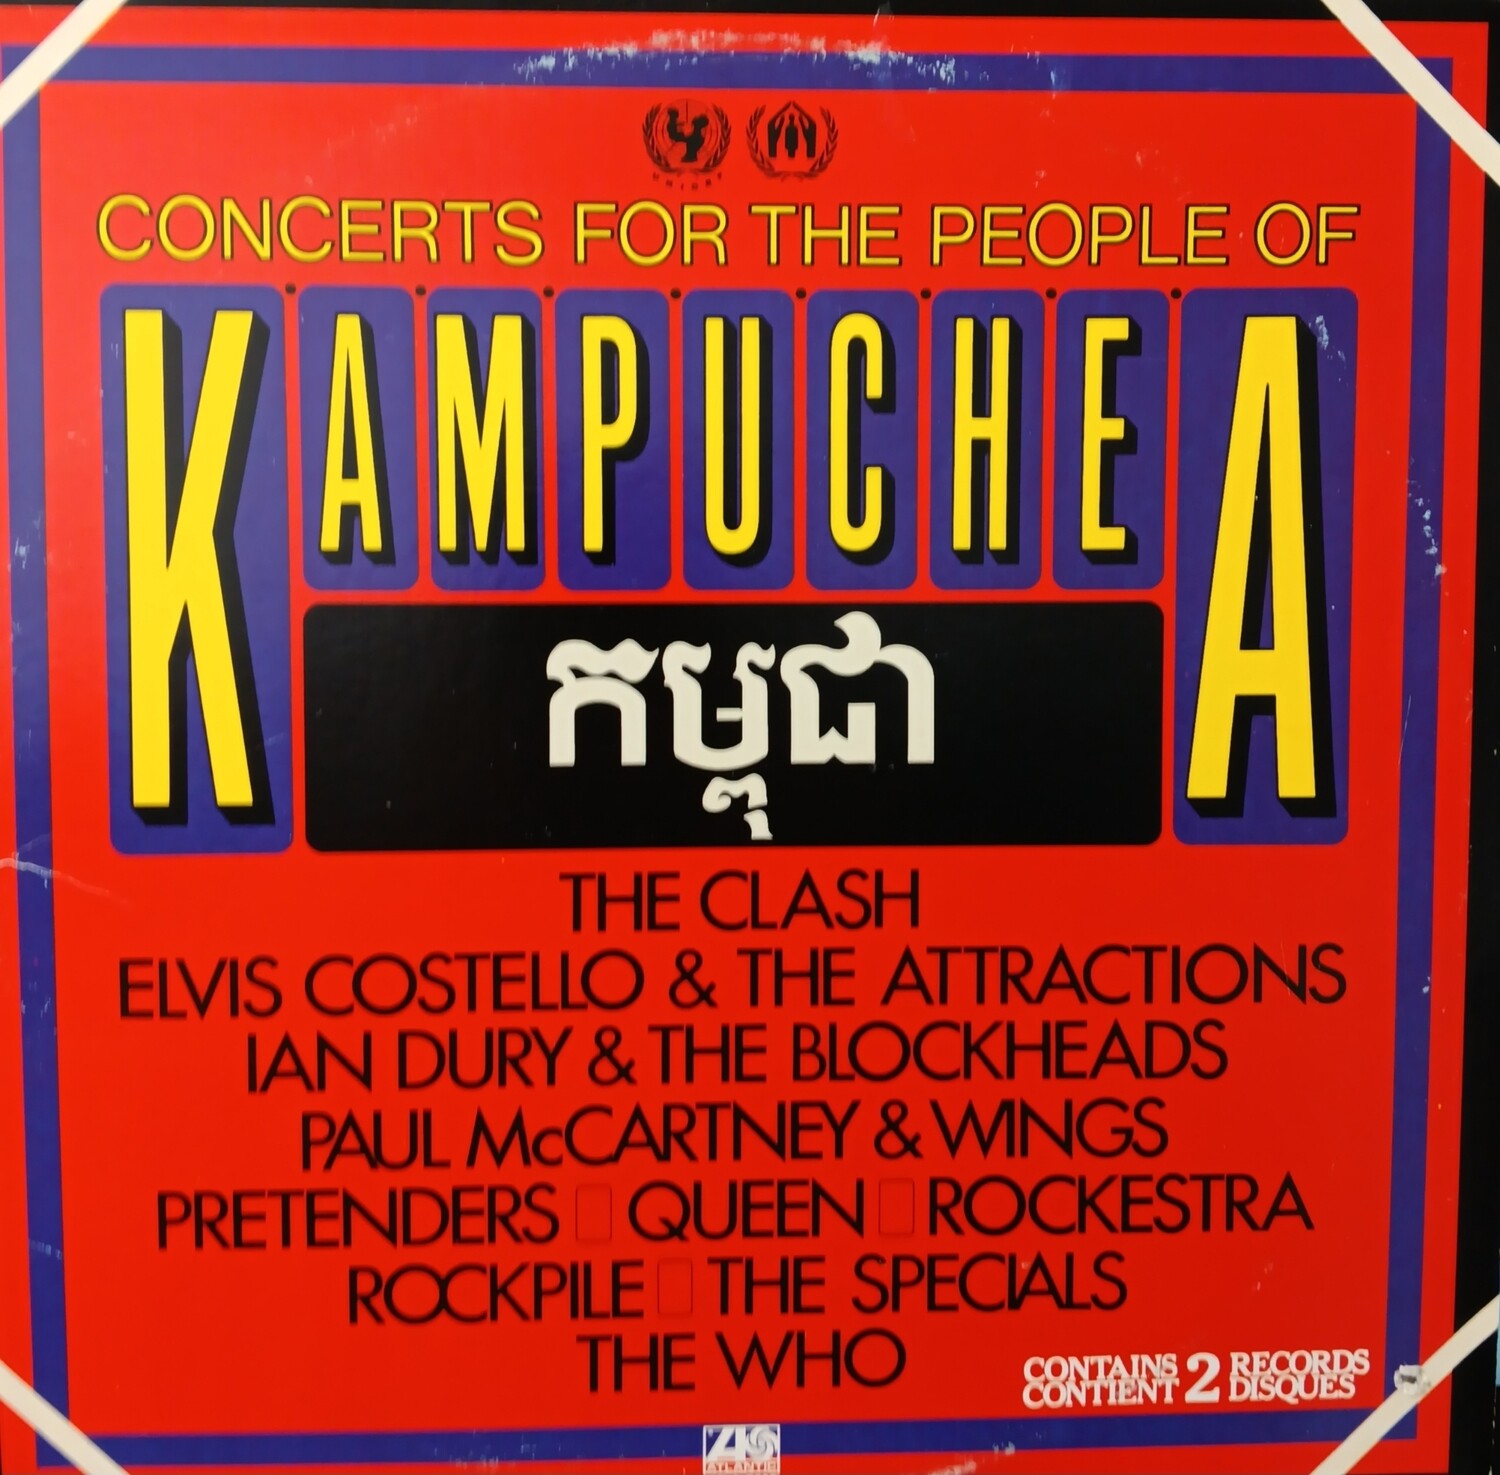 VARIOUS - Concerts for the People of Kampuchea